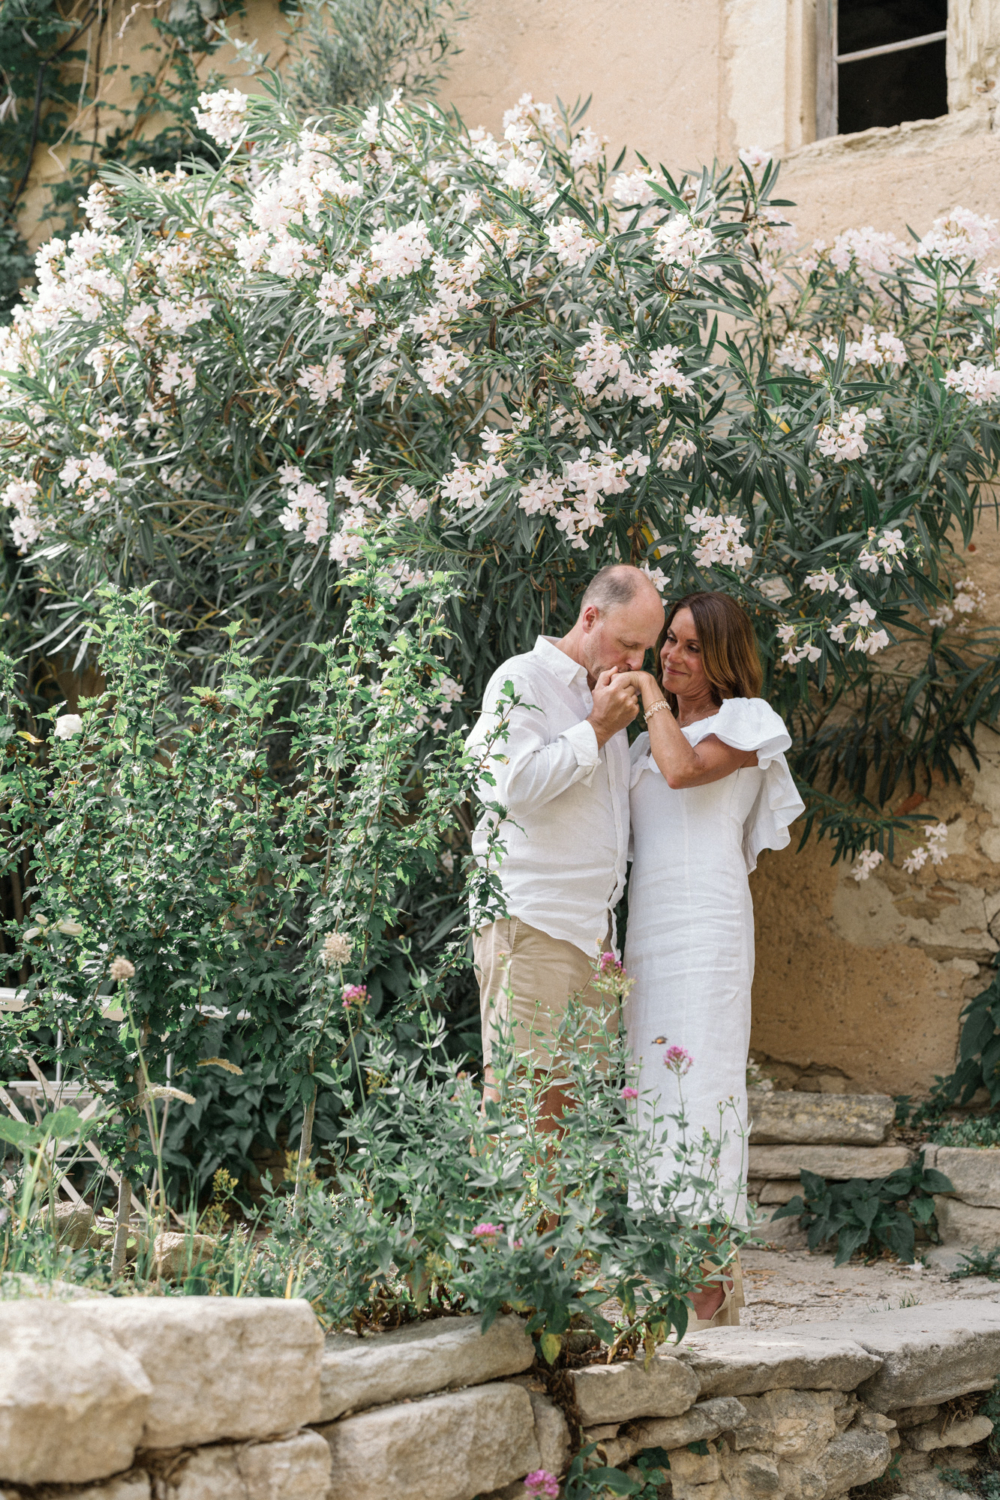 husband kisses wife's hand with white flowers in background